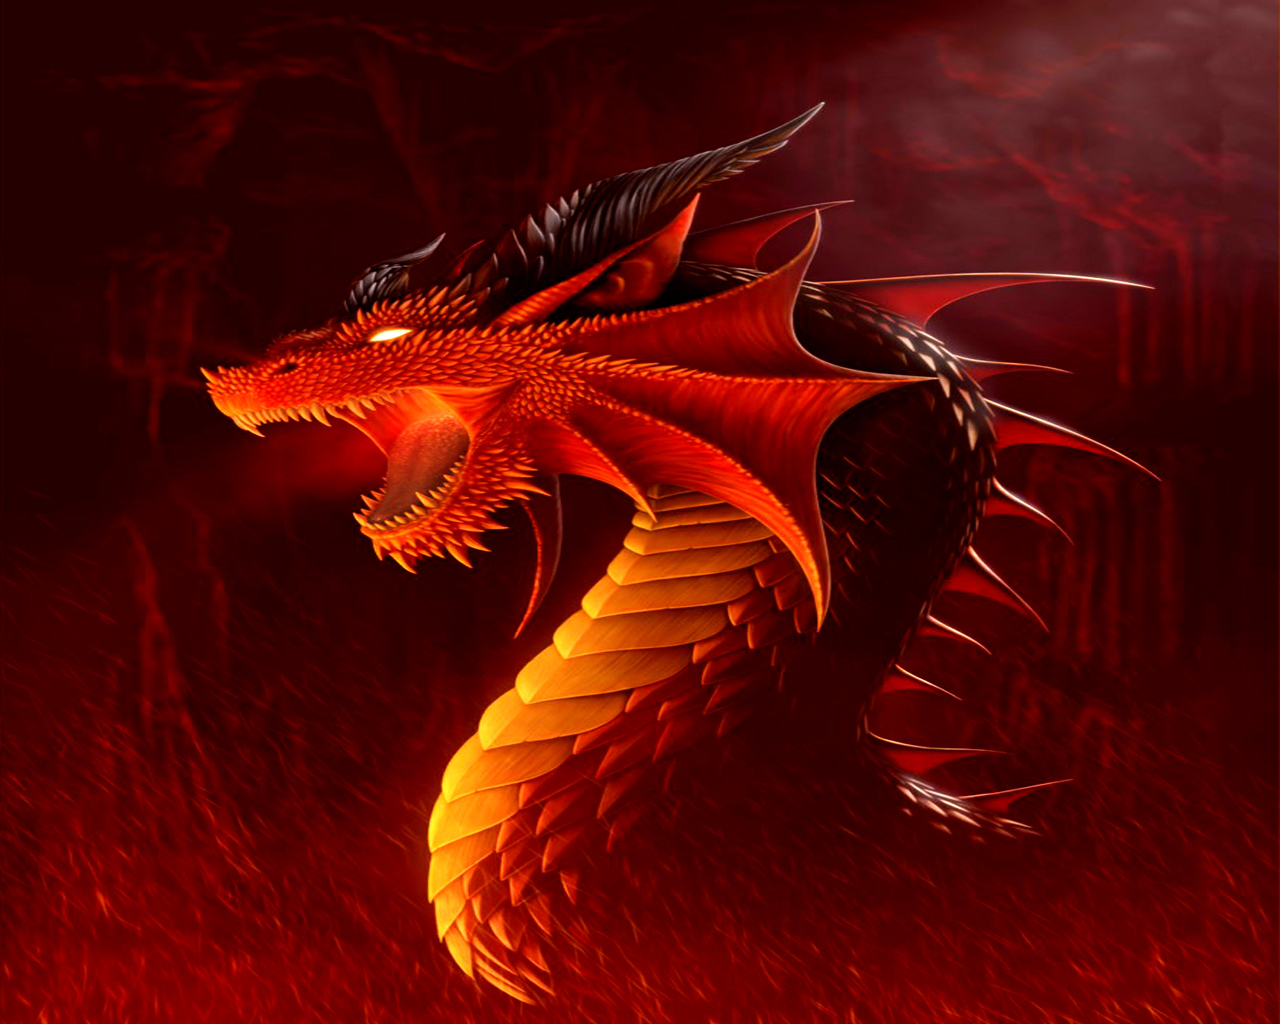 Dragons images Dragon Wallpaper HD wallpaper and background photos